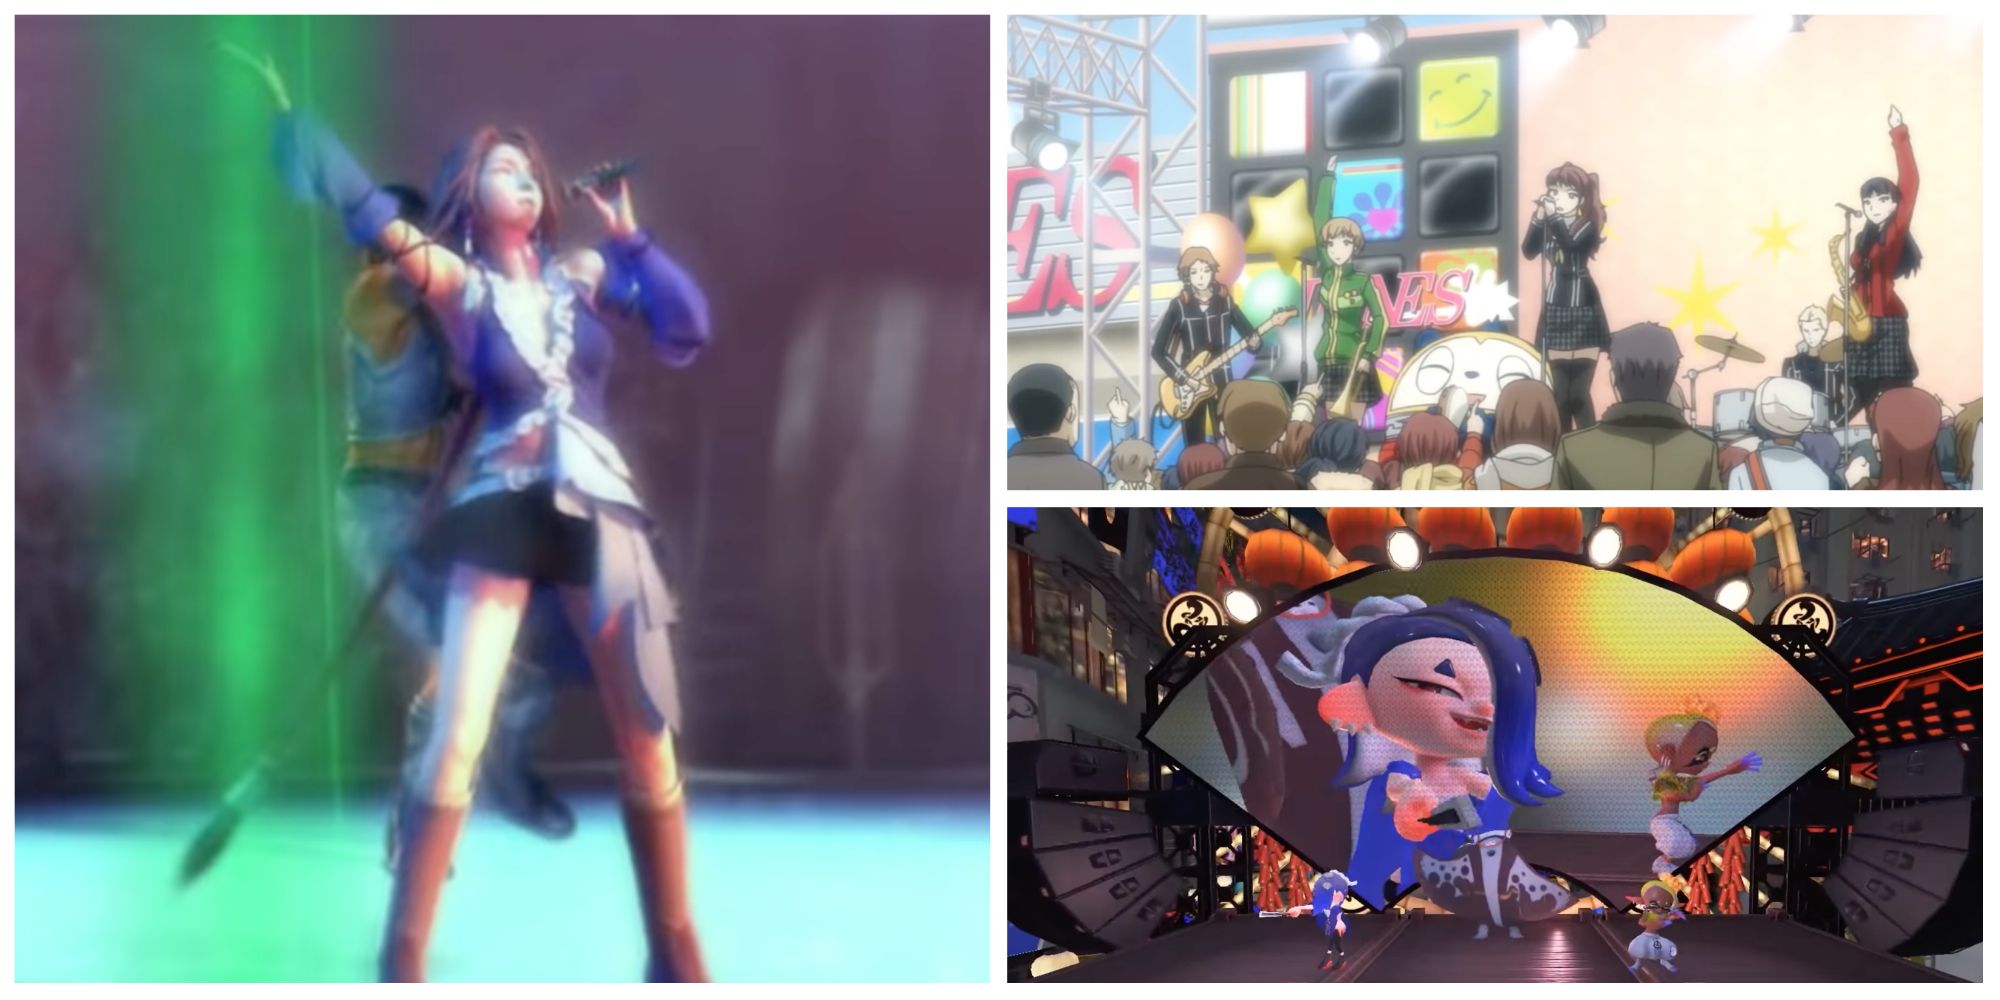  Cover Image for X Best In-Game Concerts Featuring Yuna from Final Fantasy X-2, The Cast of Persona 4 Golden, and Shiver, Big Man, and Frye from Splatoon 3